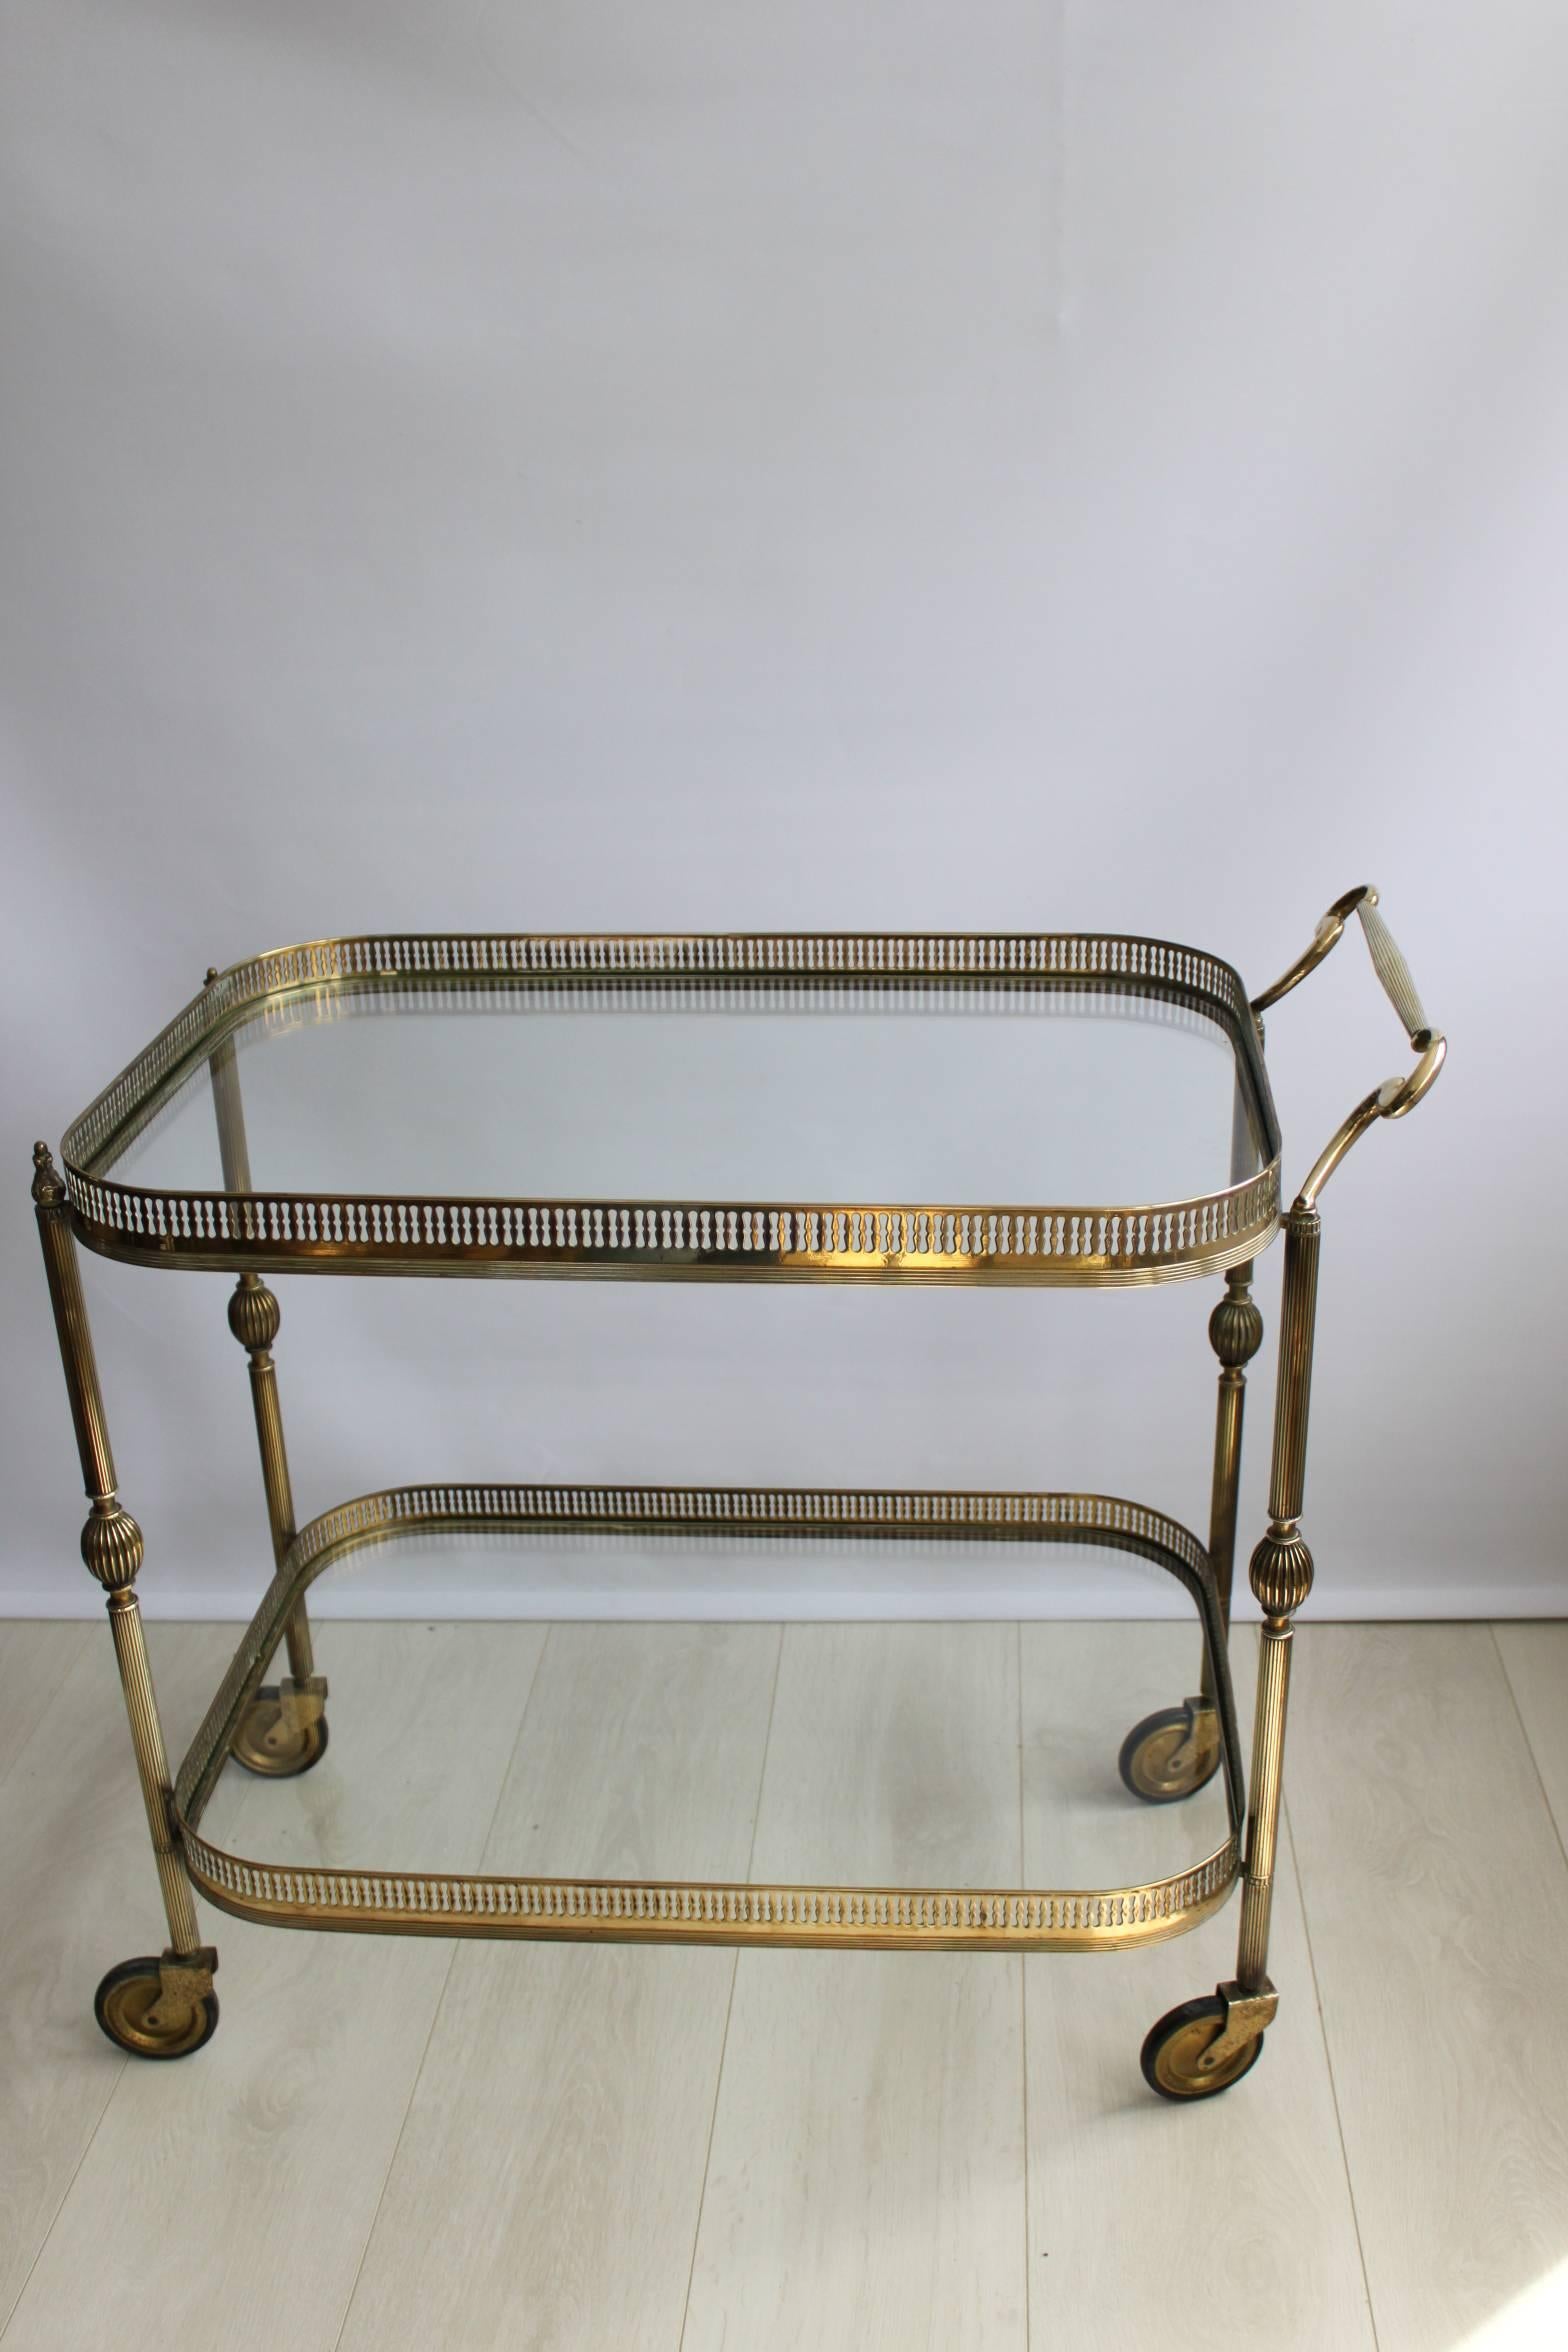 20th Century Vintage Brass French Drinks Trolley/Bar Cart